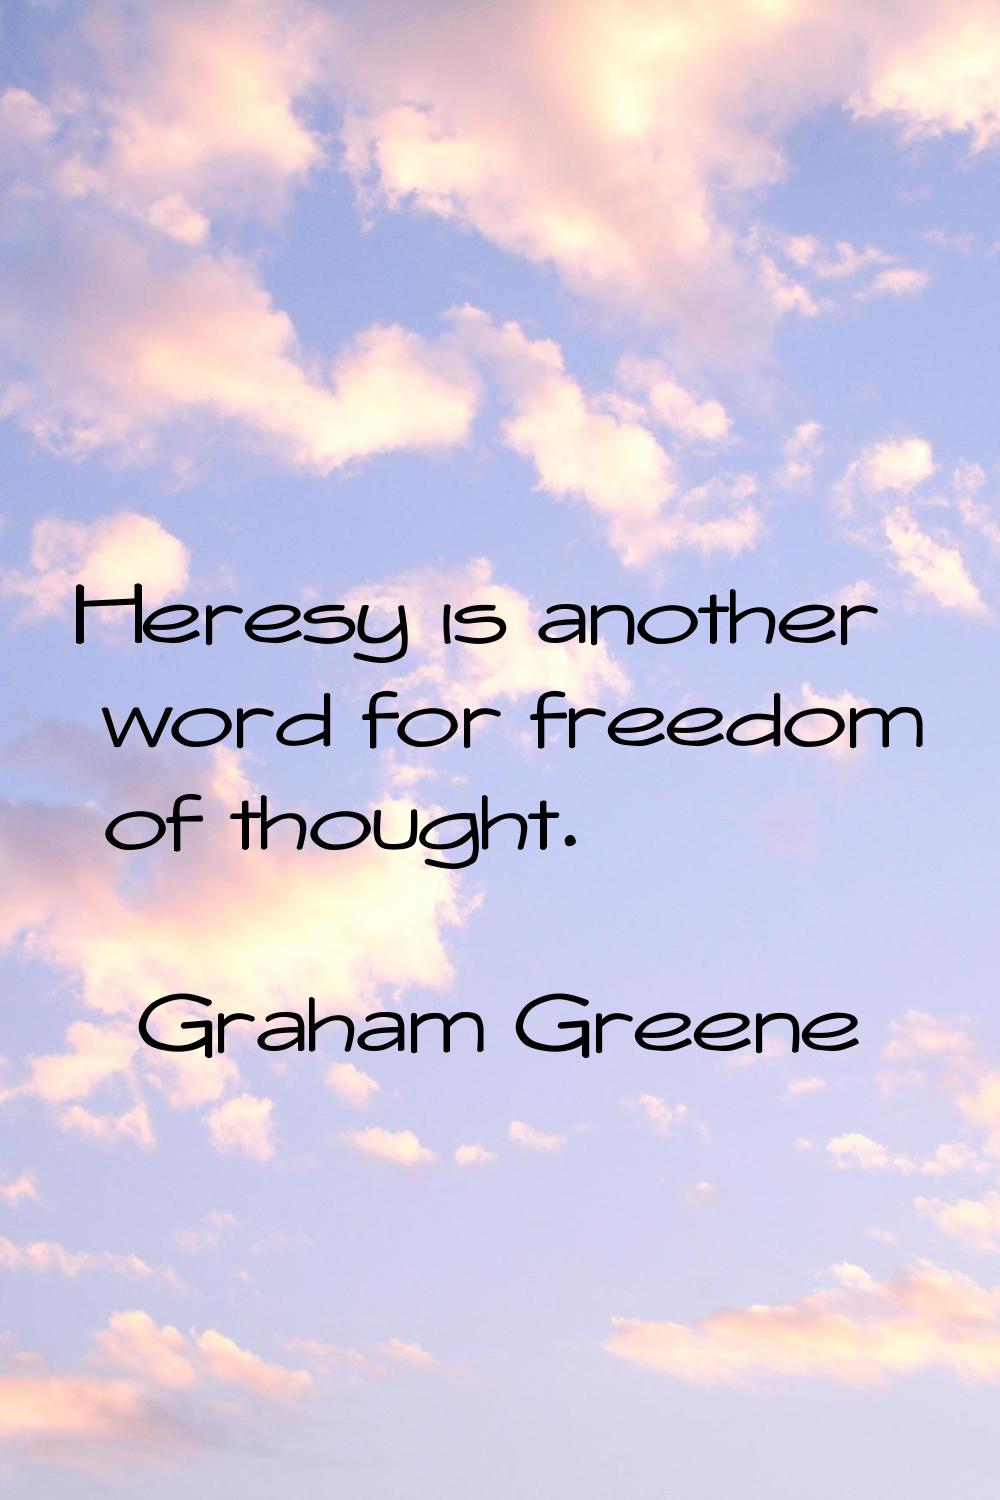 Heresy is another word for freedom of thought.